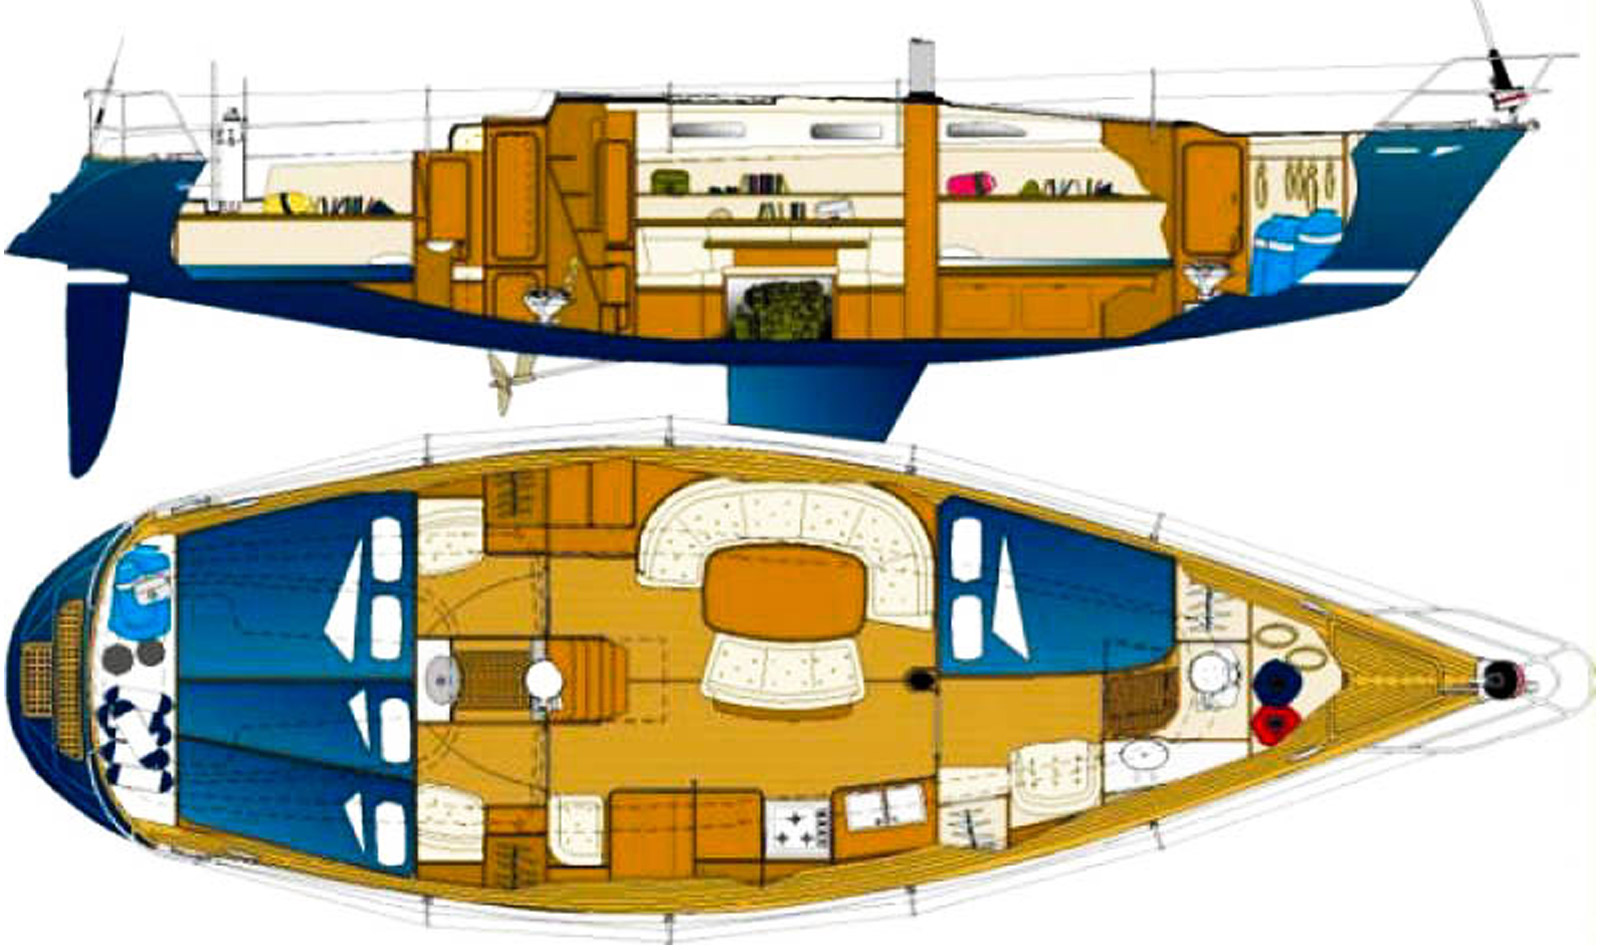 Here is the layout of the Comar 43